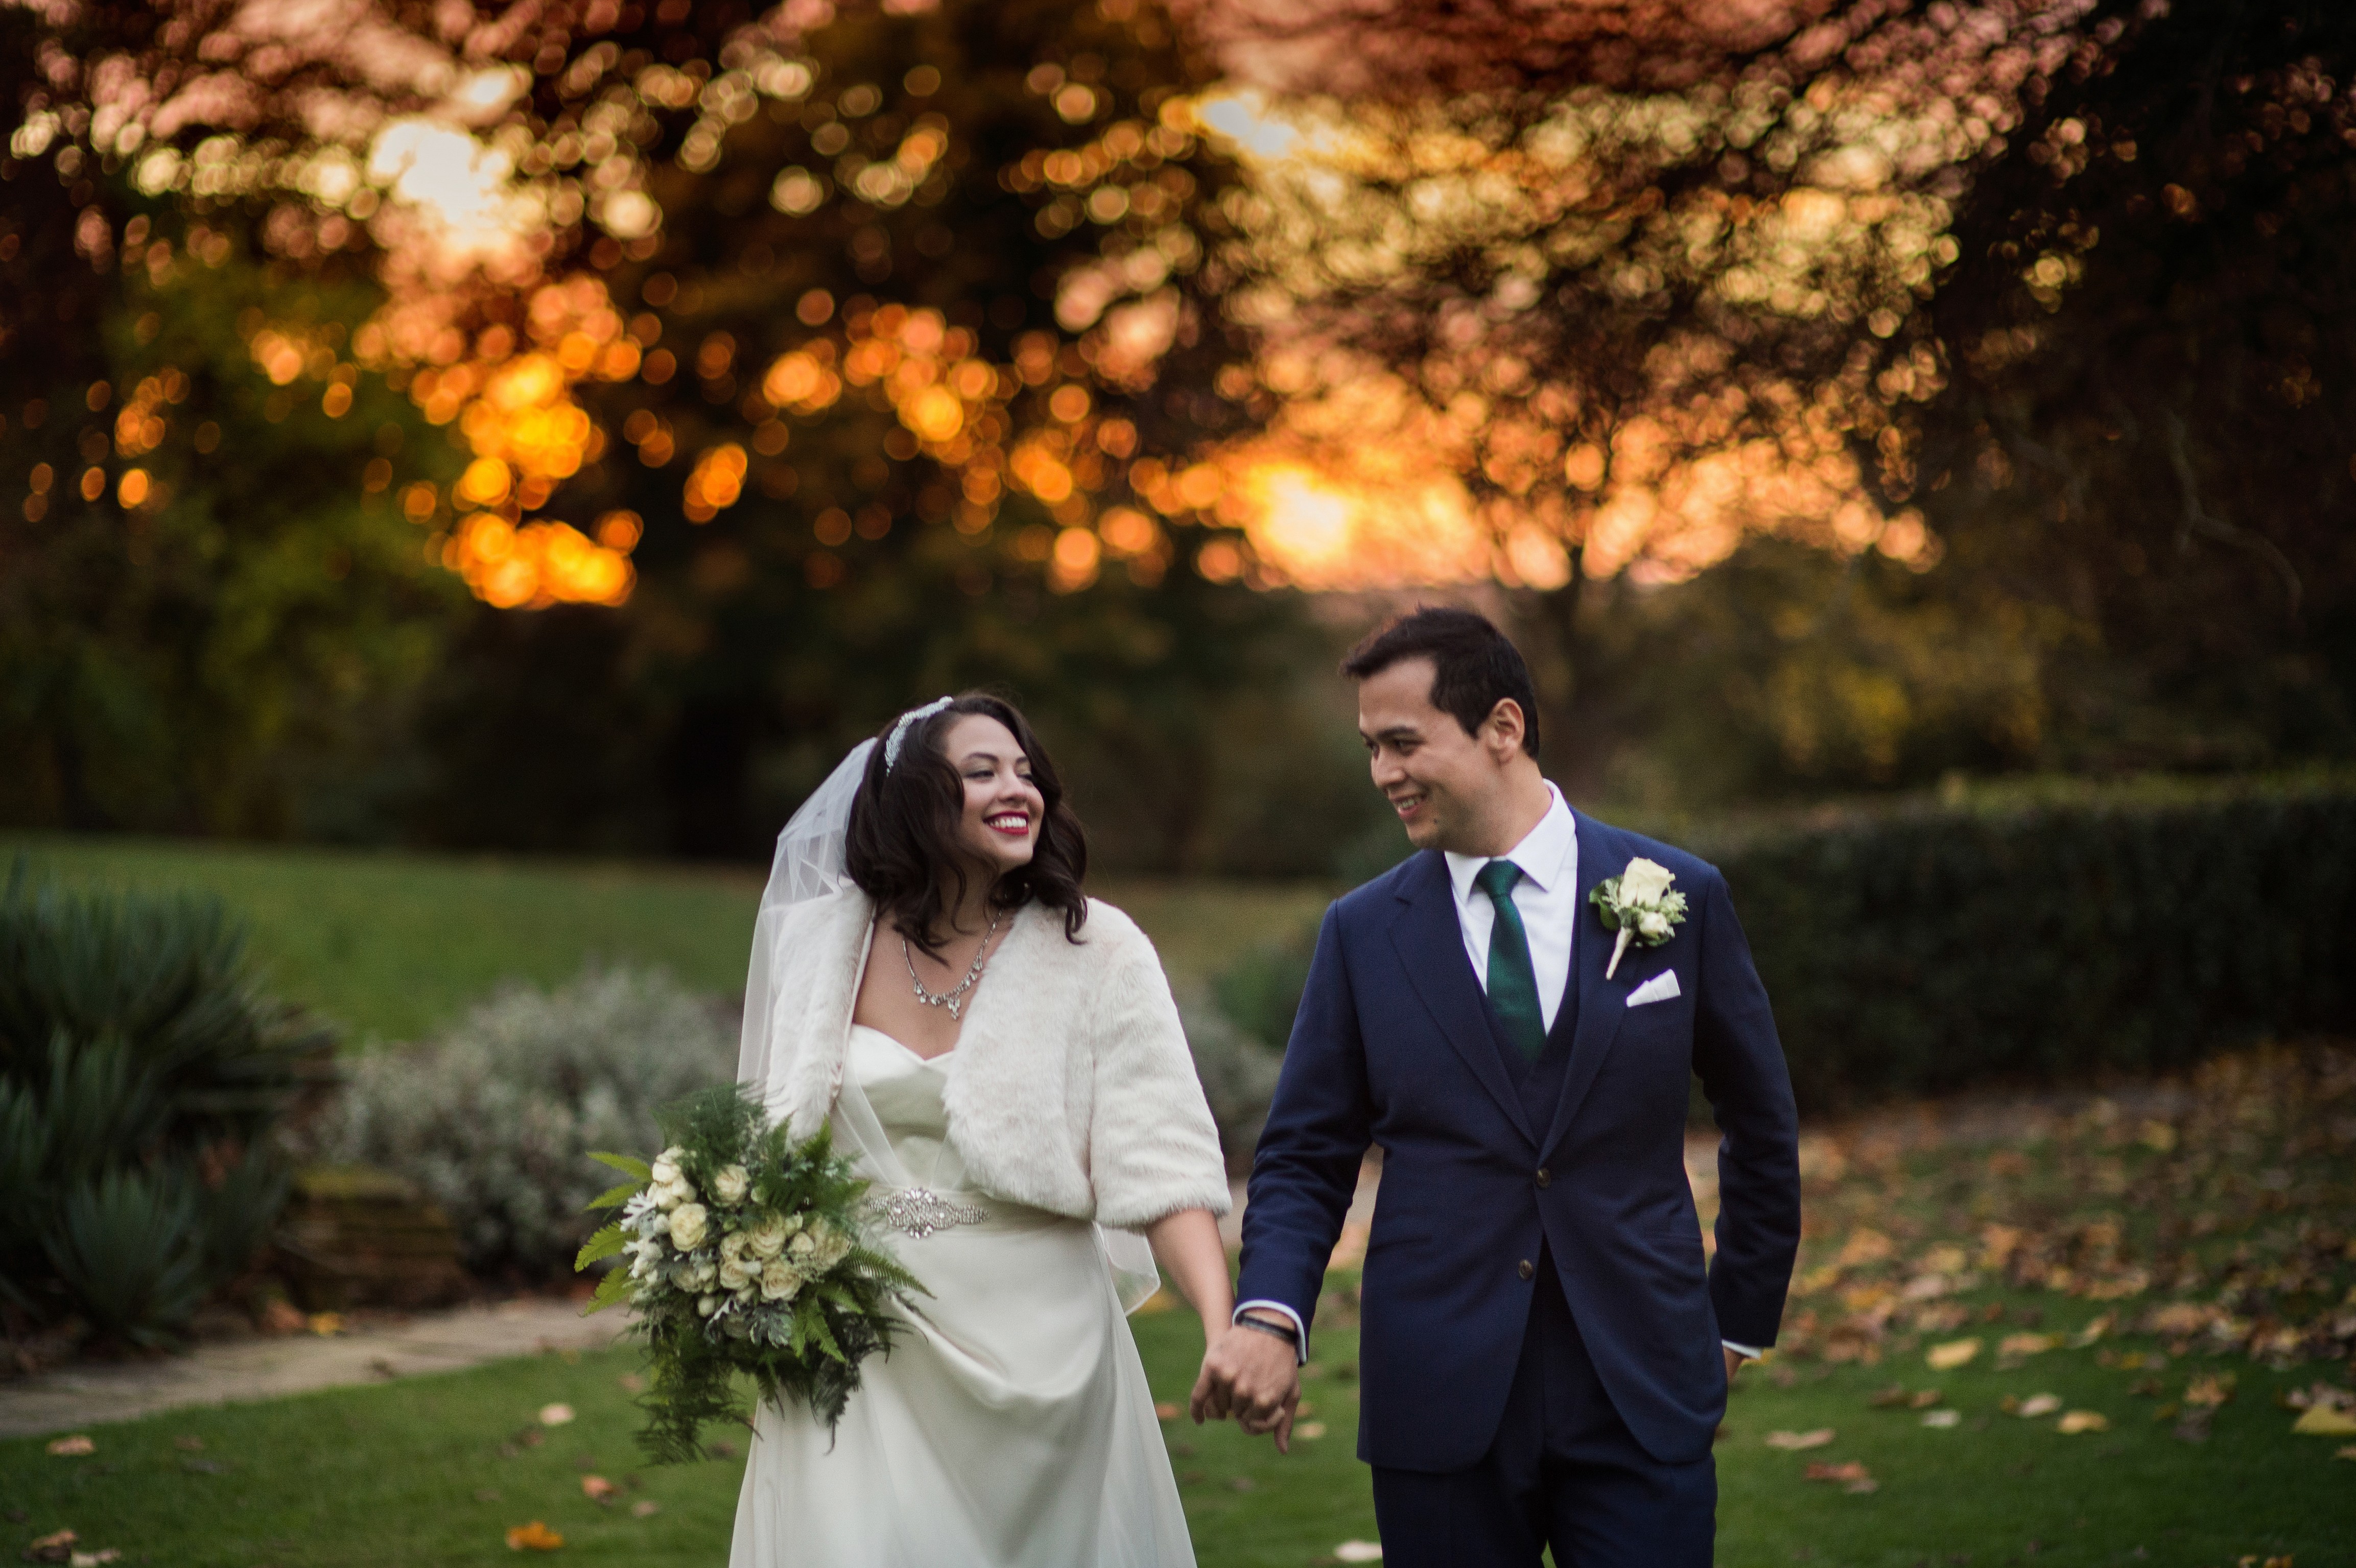 Adam White and his bride Lindsey Ford. Photo: Tom Gold Photography